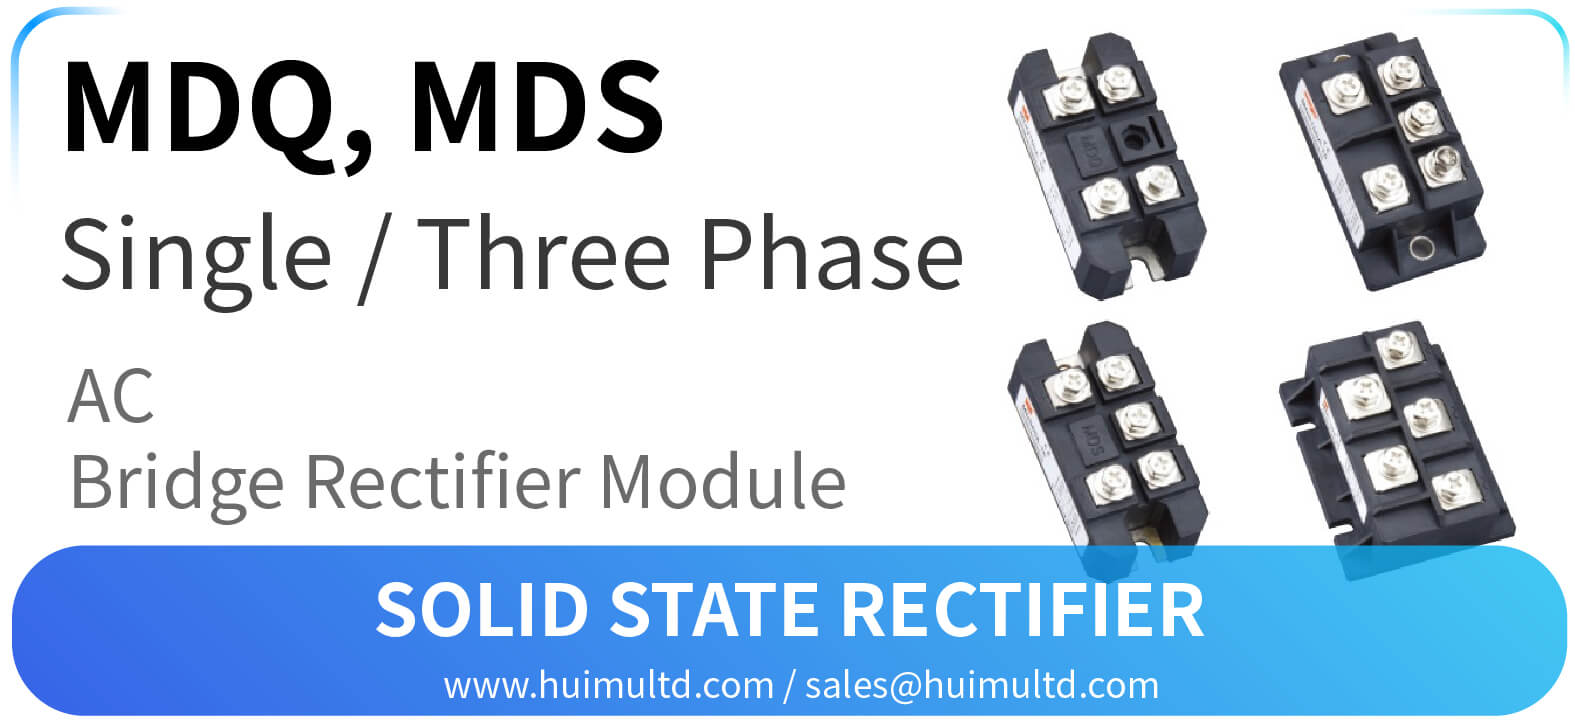 MDQ, MDS Series Solid State Rectifier